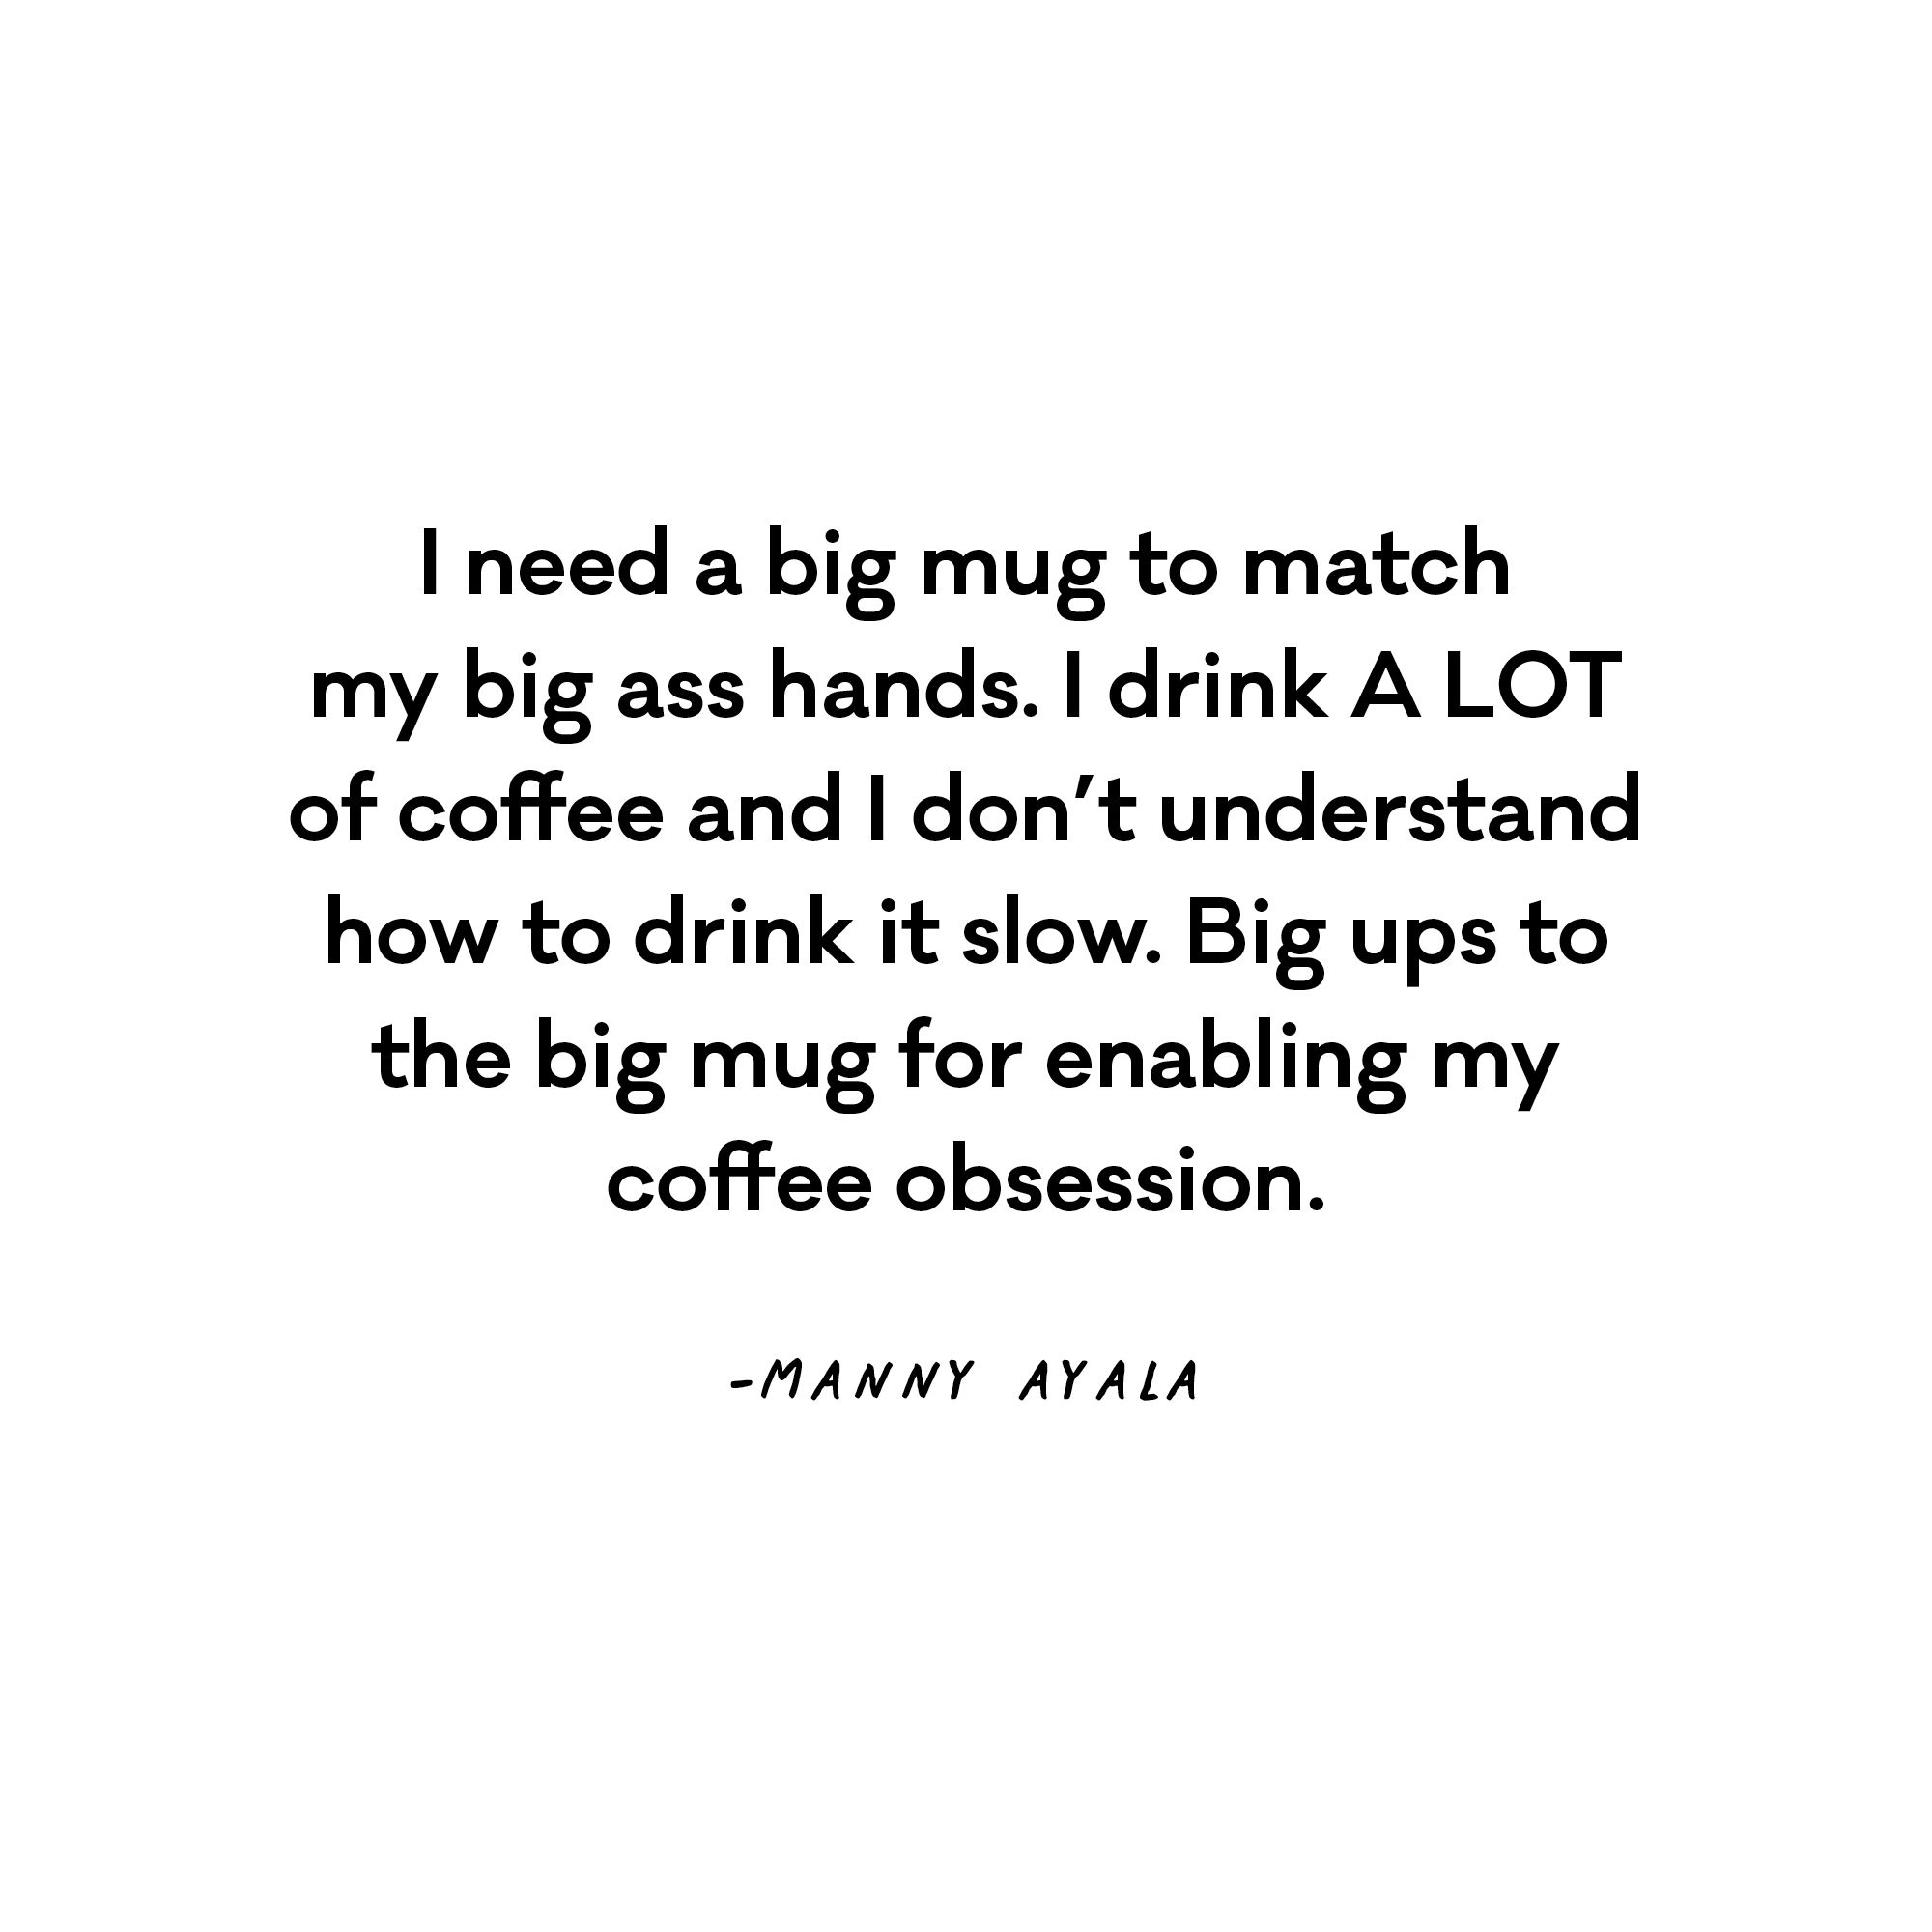 I need a big mug to match my big ass hands. I drink A LOT of coffee and I don’t understand how to drink it slow. Big ups to the big mug for enabling my coffee obsession. - Manny Ayala